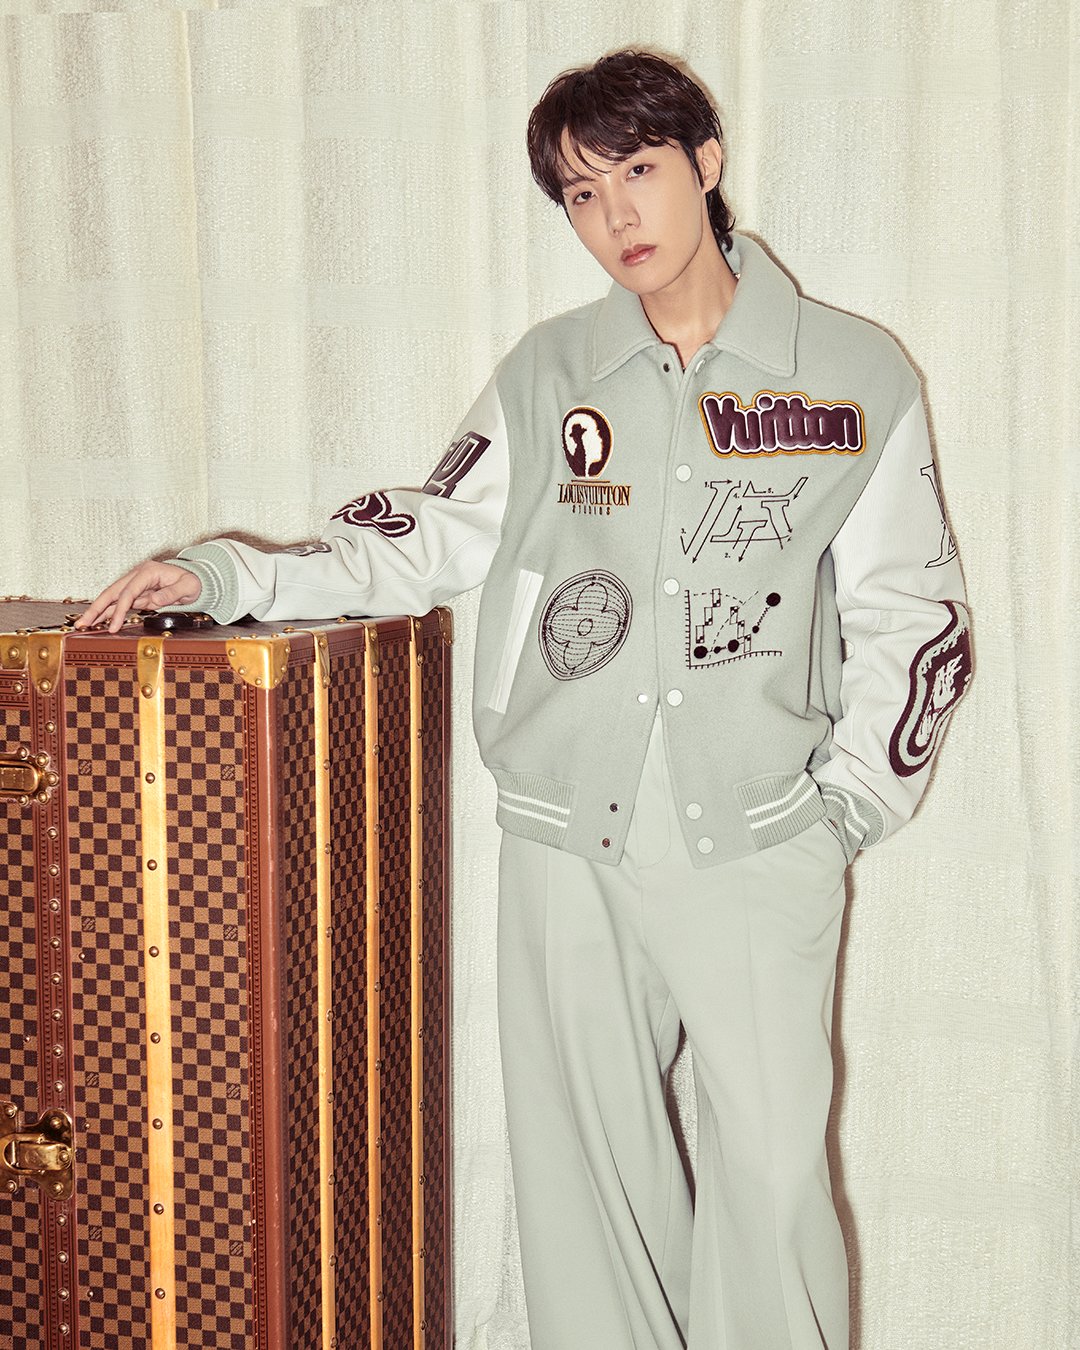 J-Hope And Louis Vuitton: A Decade Of BTS Celebrated Through